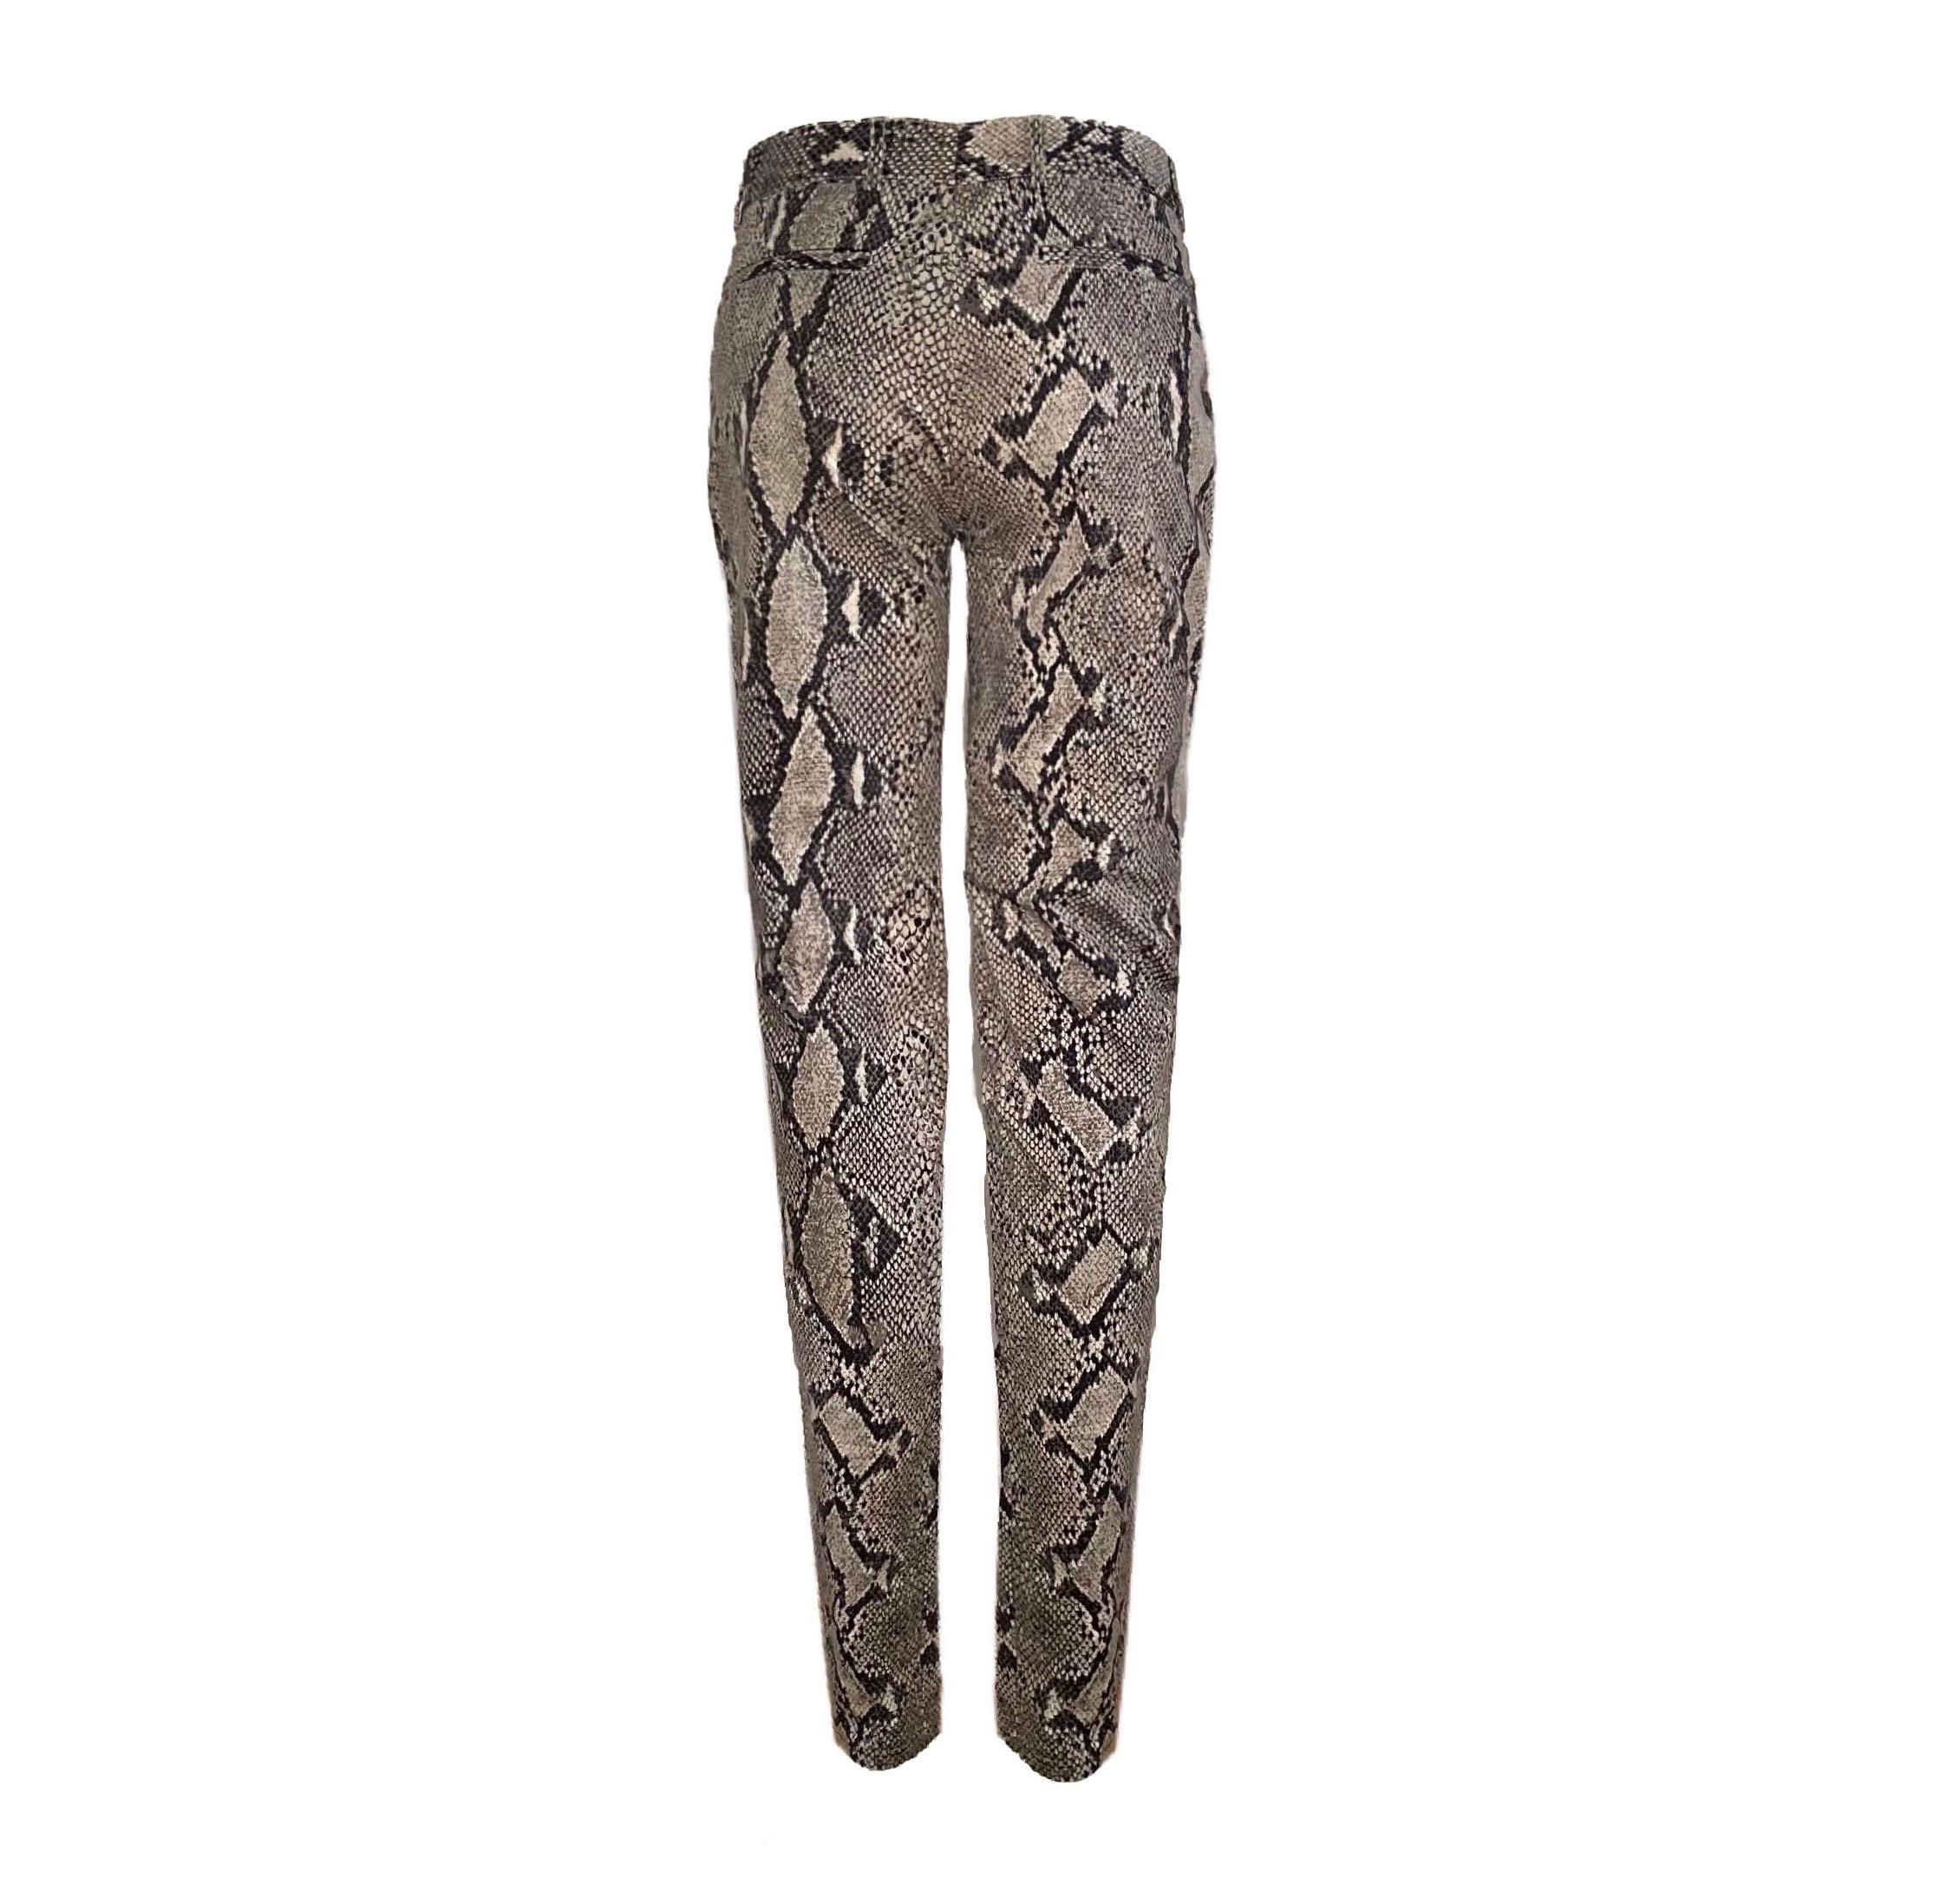 Tom Ford for Gucci grey snake skin print cotton skinny trousers from the Spring/Summer 2000 collection

Size IT 44

Waistline – 80 cm / 31,4 inches  
Outseam – 104 cm / 40,9 inches  
Inseam – 79 cm / 31,1 inches 